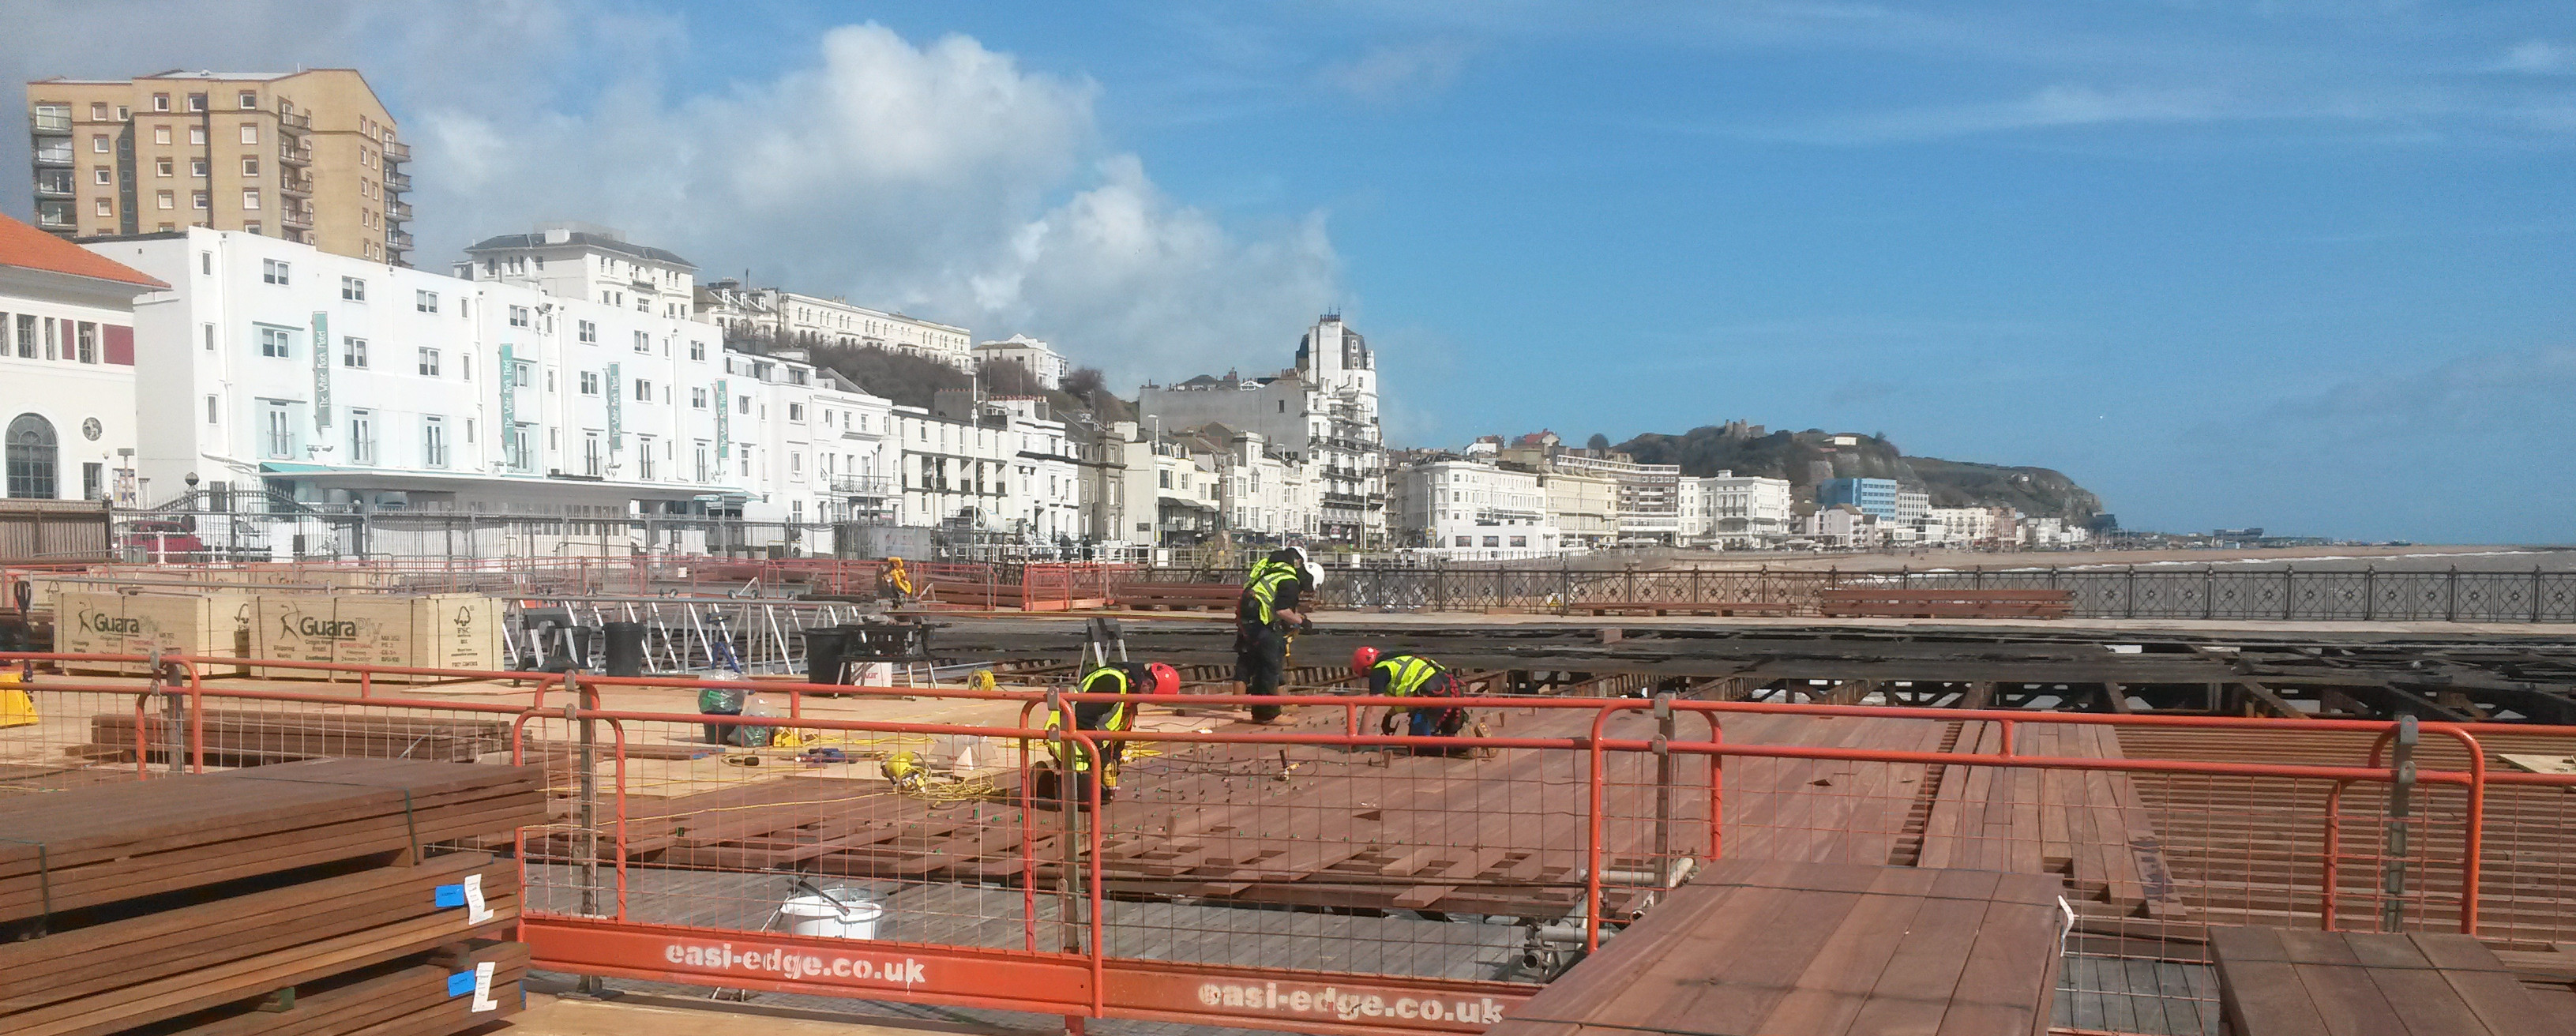 image shows Temporary Works construction